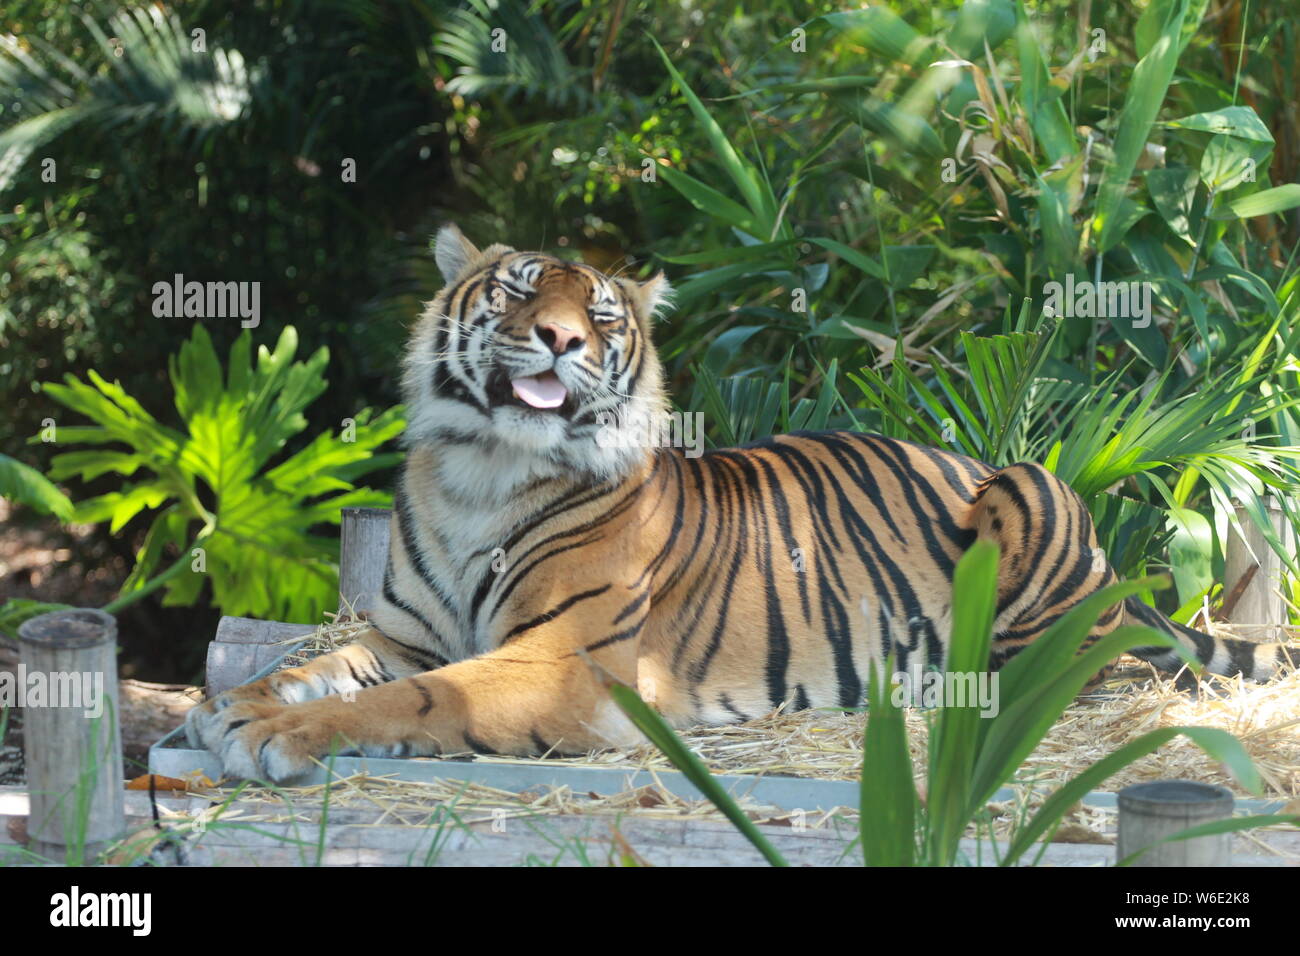 Tigre making a grin Stock Photo